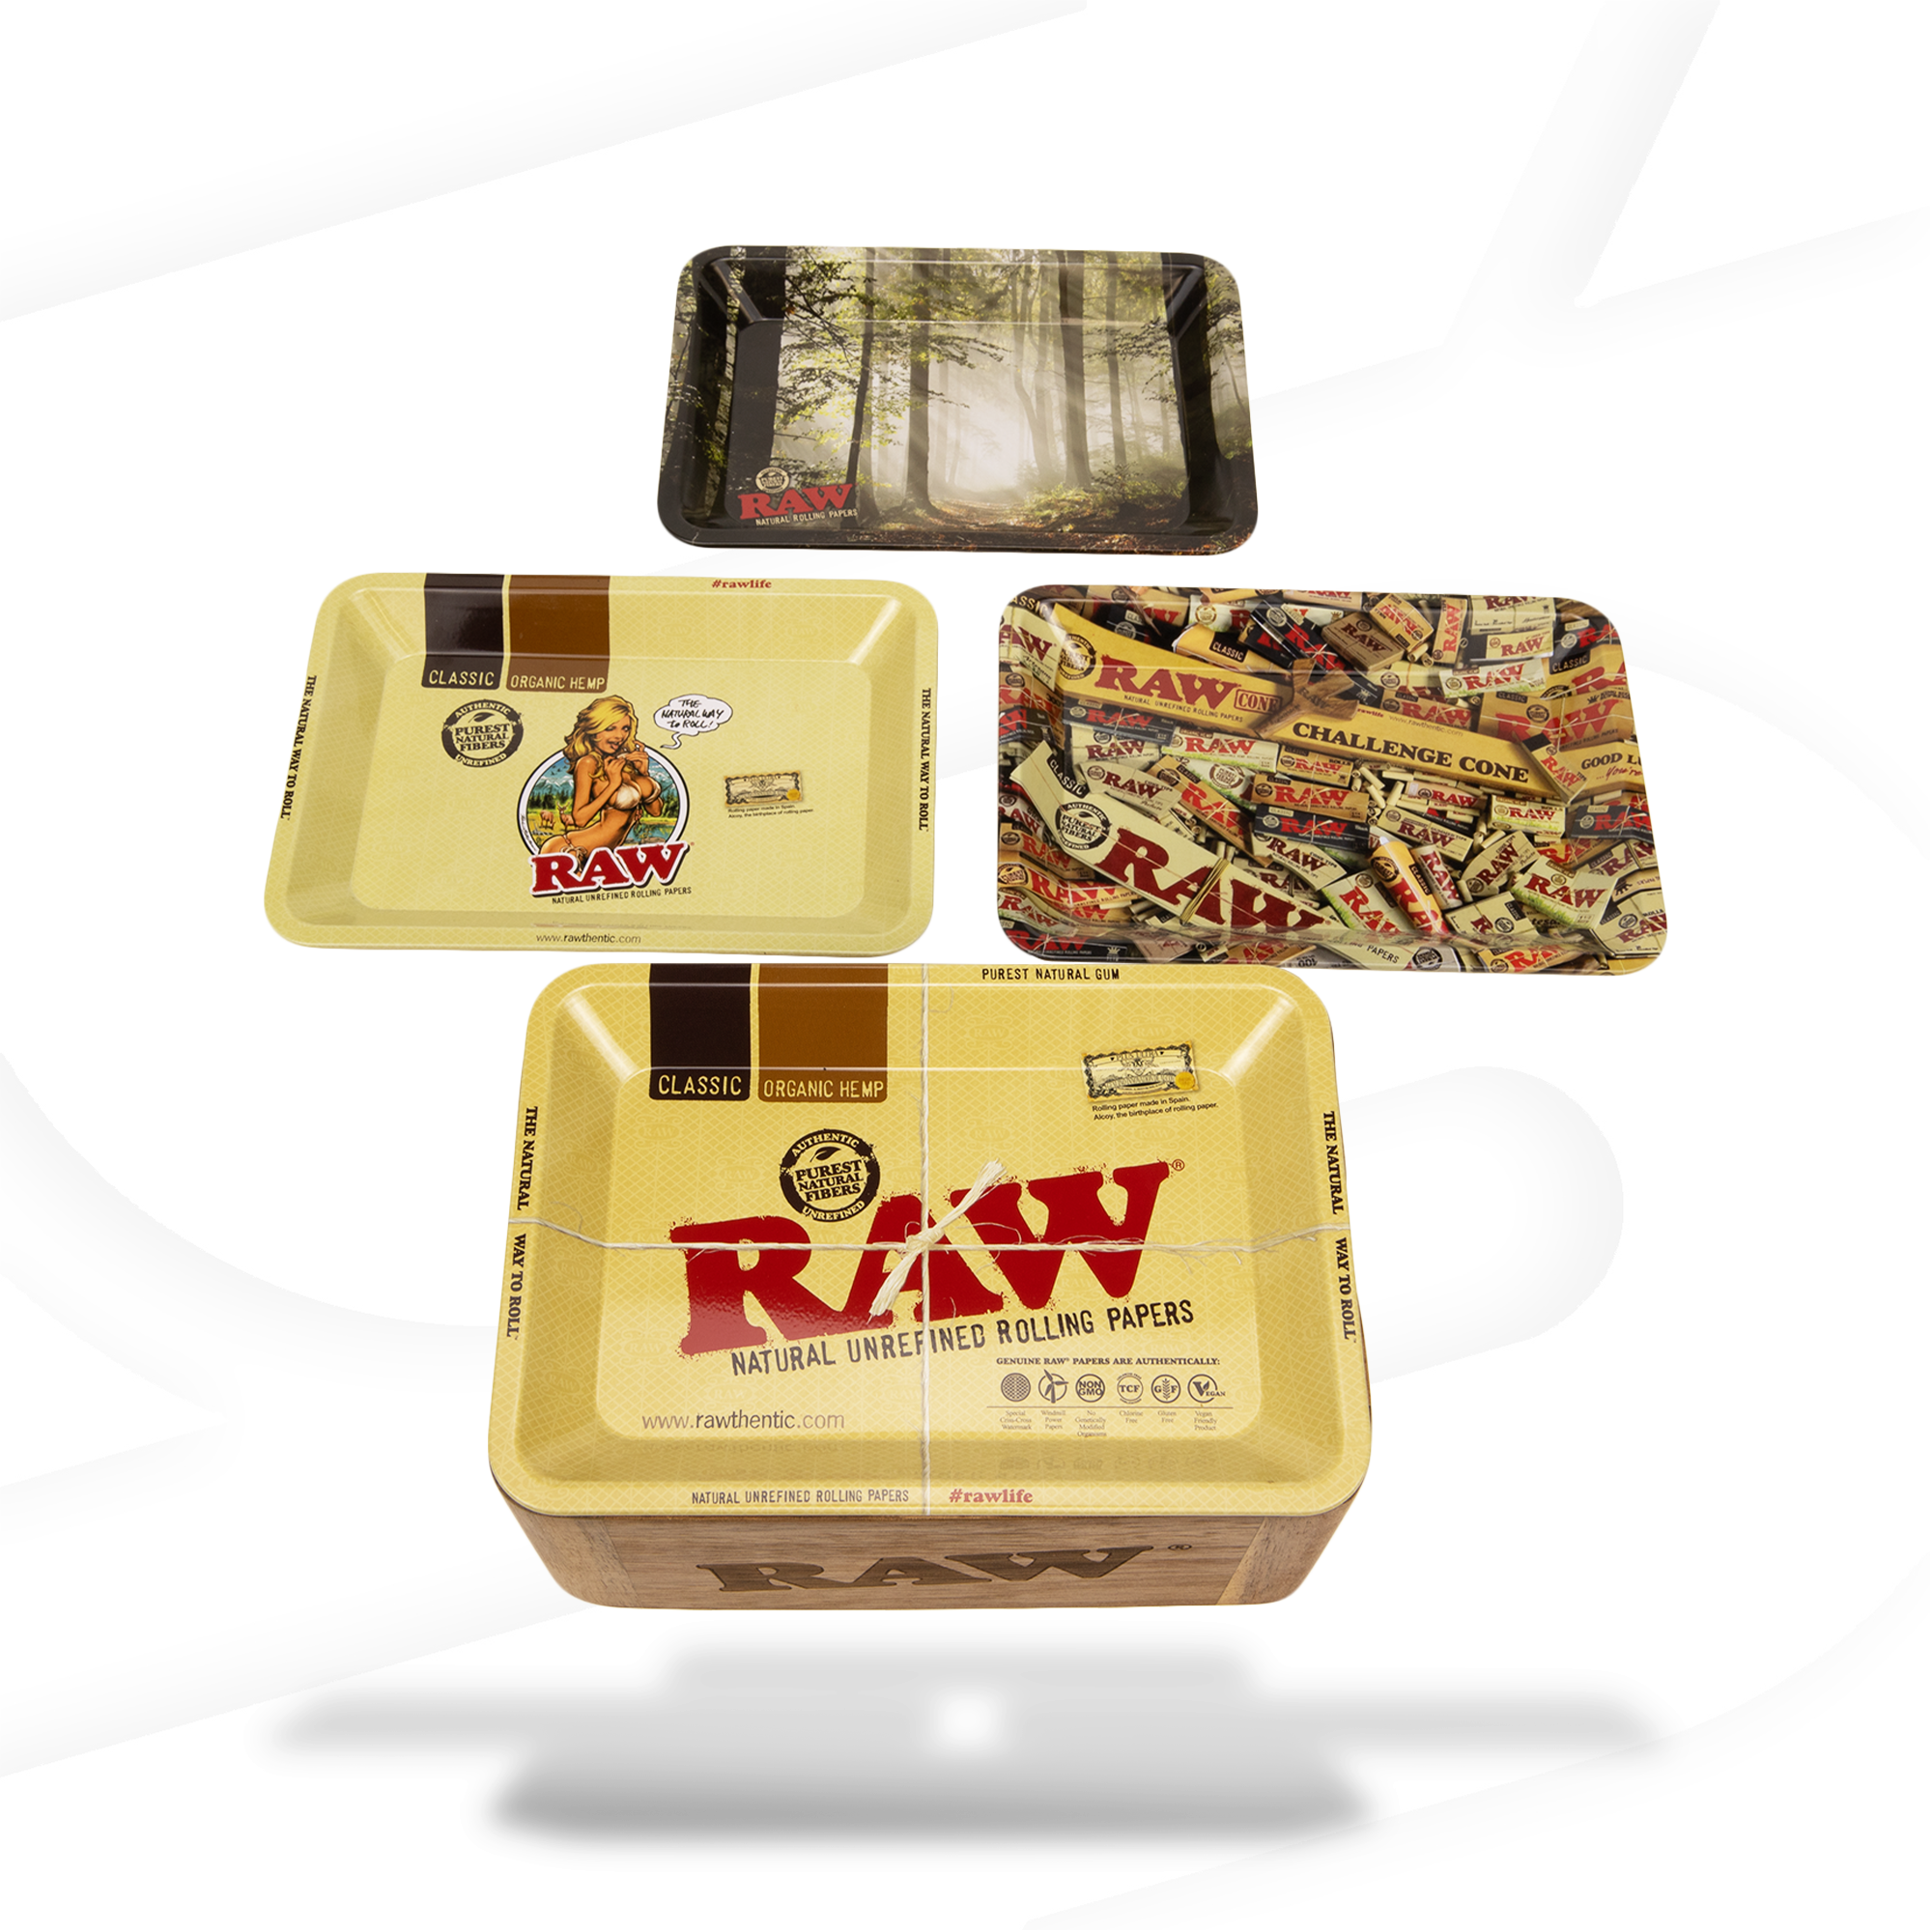 Buy RAW Hands-Free Smoker Online - ESD Official